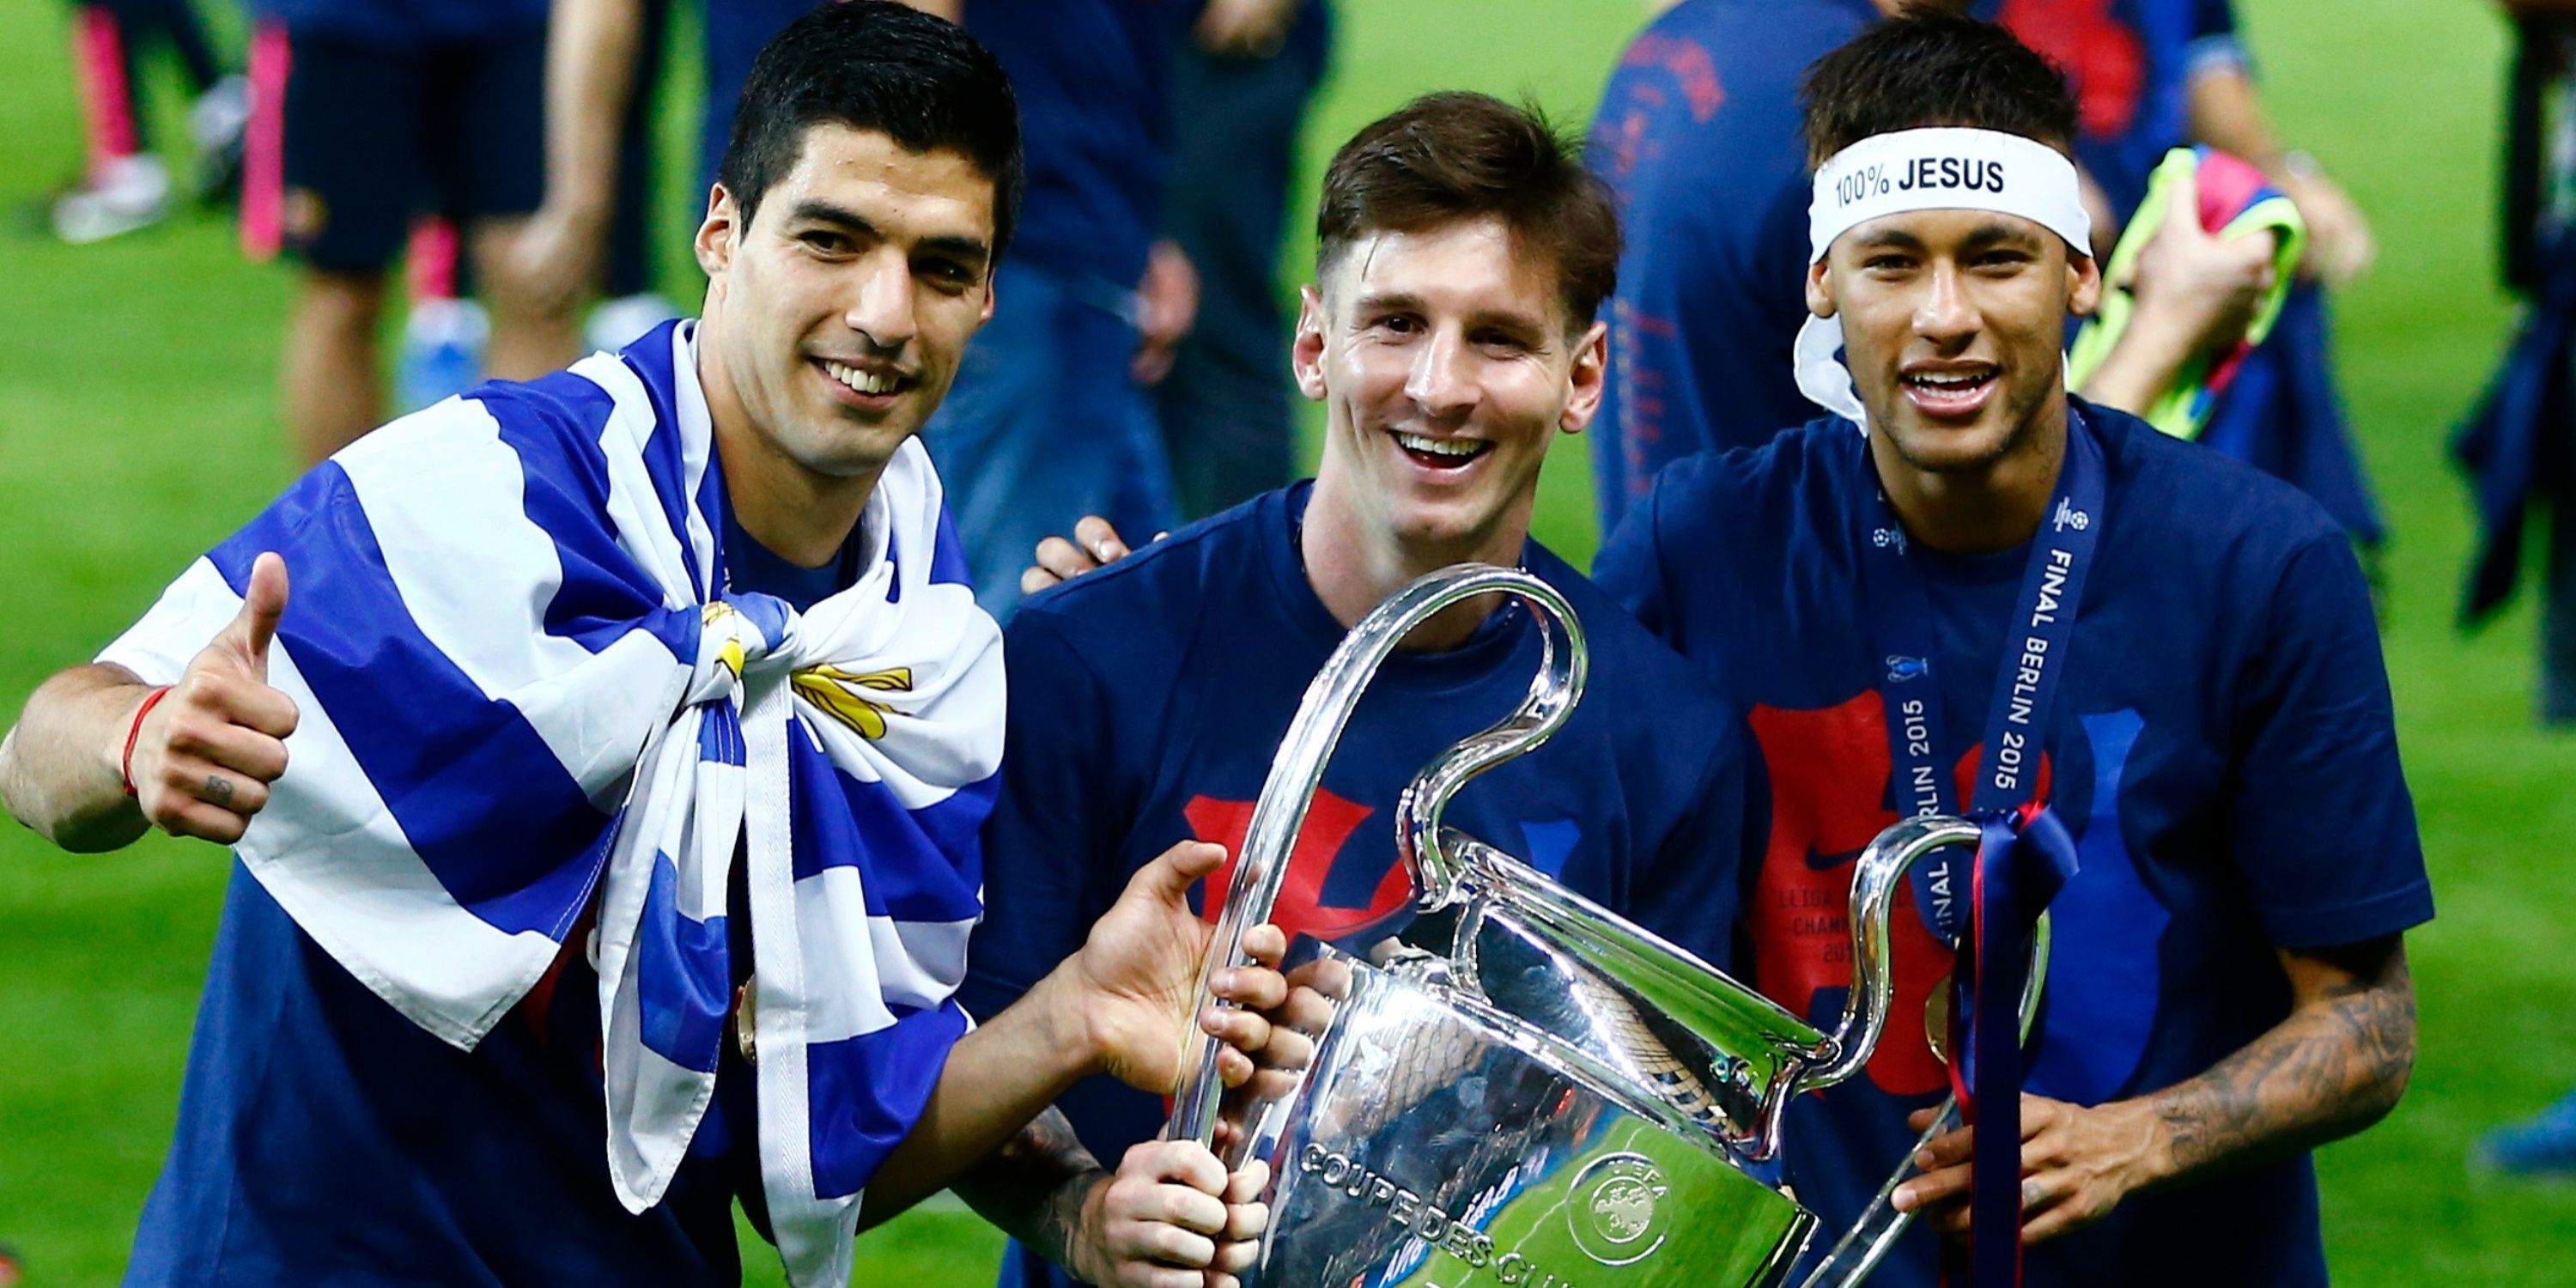 Barcelona's Luis Suarez, Lionel Messi and Neymar celebrate with the trophy after winning the UEFA Champions League